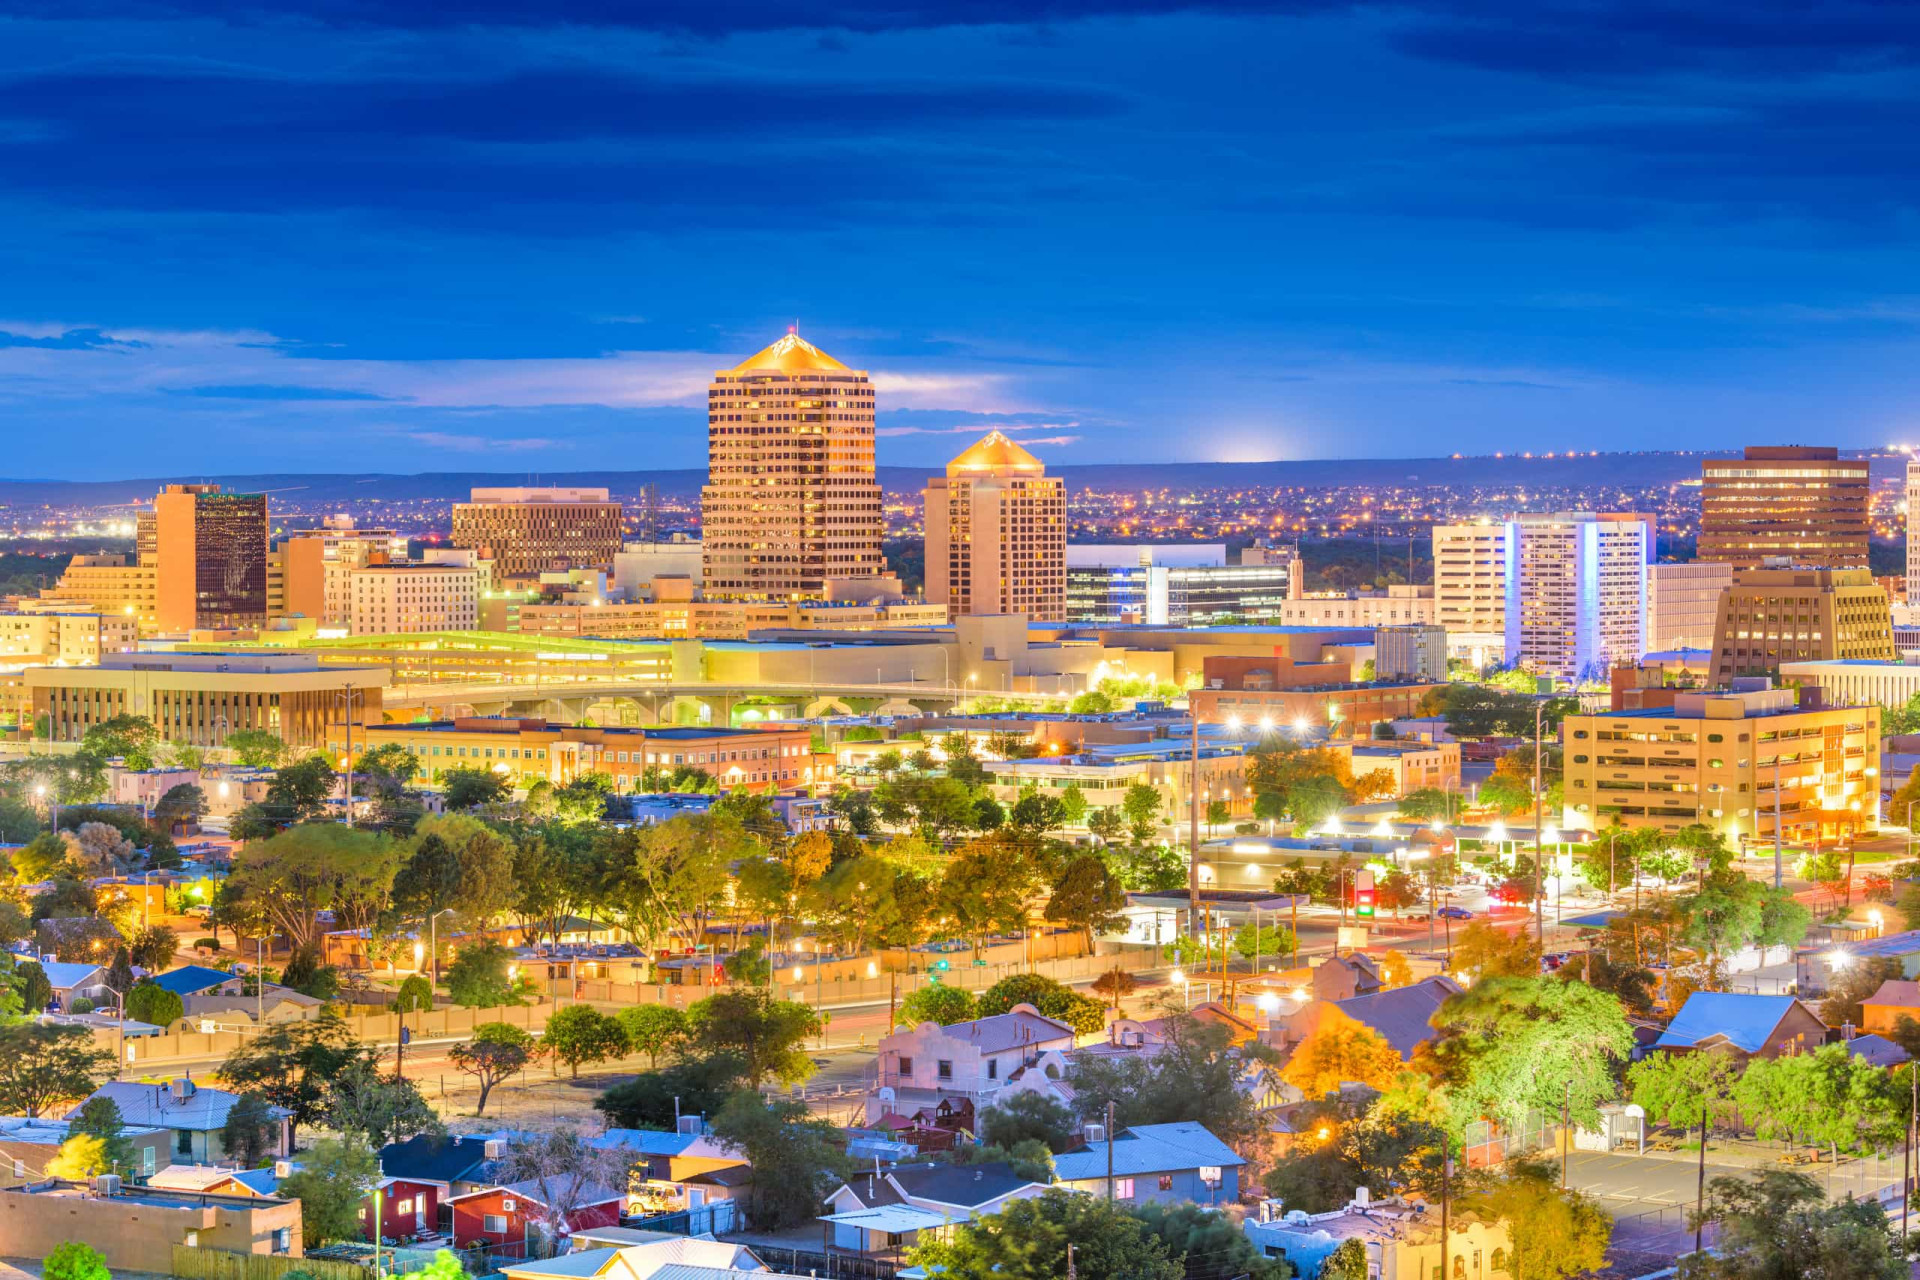 <p>New Mexico's largest city is Albuquerque. While not as picturesque as Santa Fe, Albuquerque has plenty going for it, including several excellent museums and a thriving live music scene. It's also the setting for one of the most spectacular outdoor extravaganzas on the planet.</p><p>You may also like:<a href="https://www.starsinsider.com/n/419983?utm_source=msn.com&utm_medium=display&utm_campaign=referral_description&utm_content=487164v6en-en"> Will Brad and Jen ever be a couple again?</a></p>